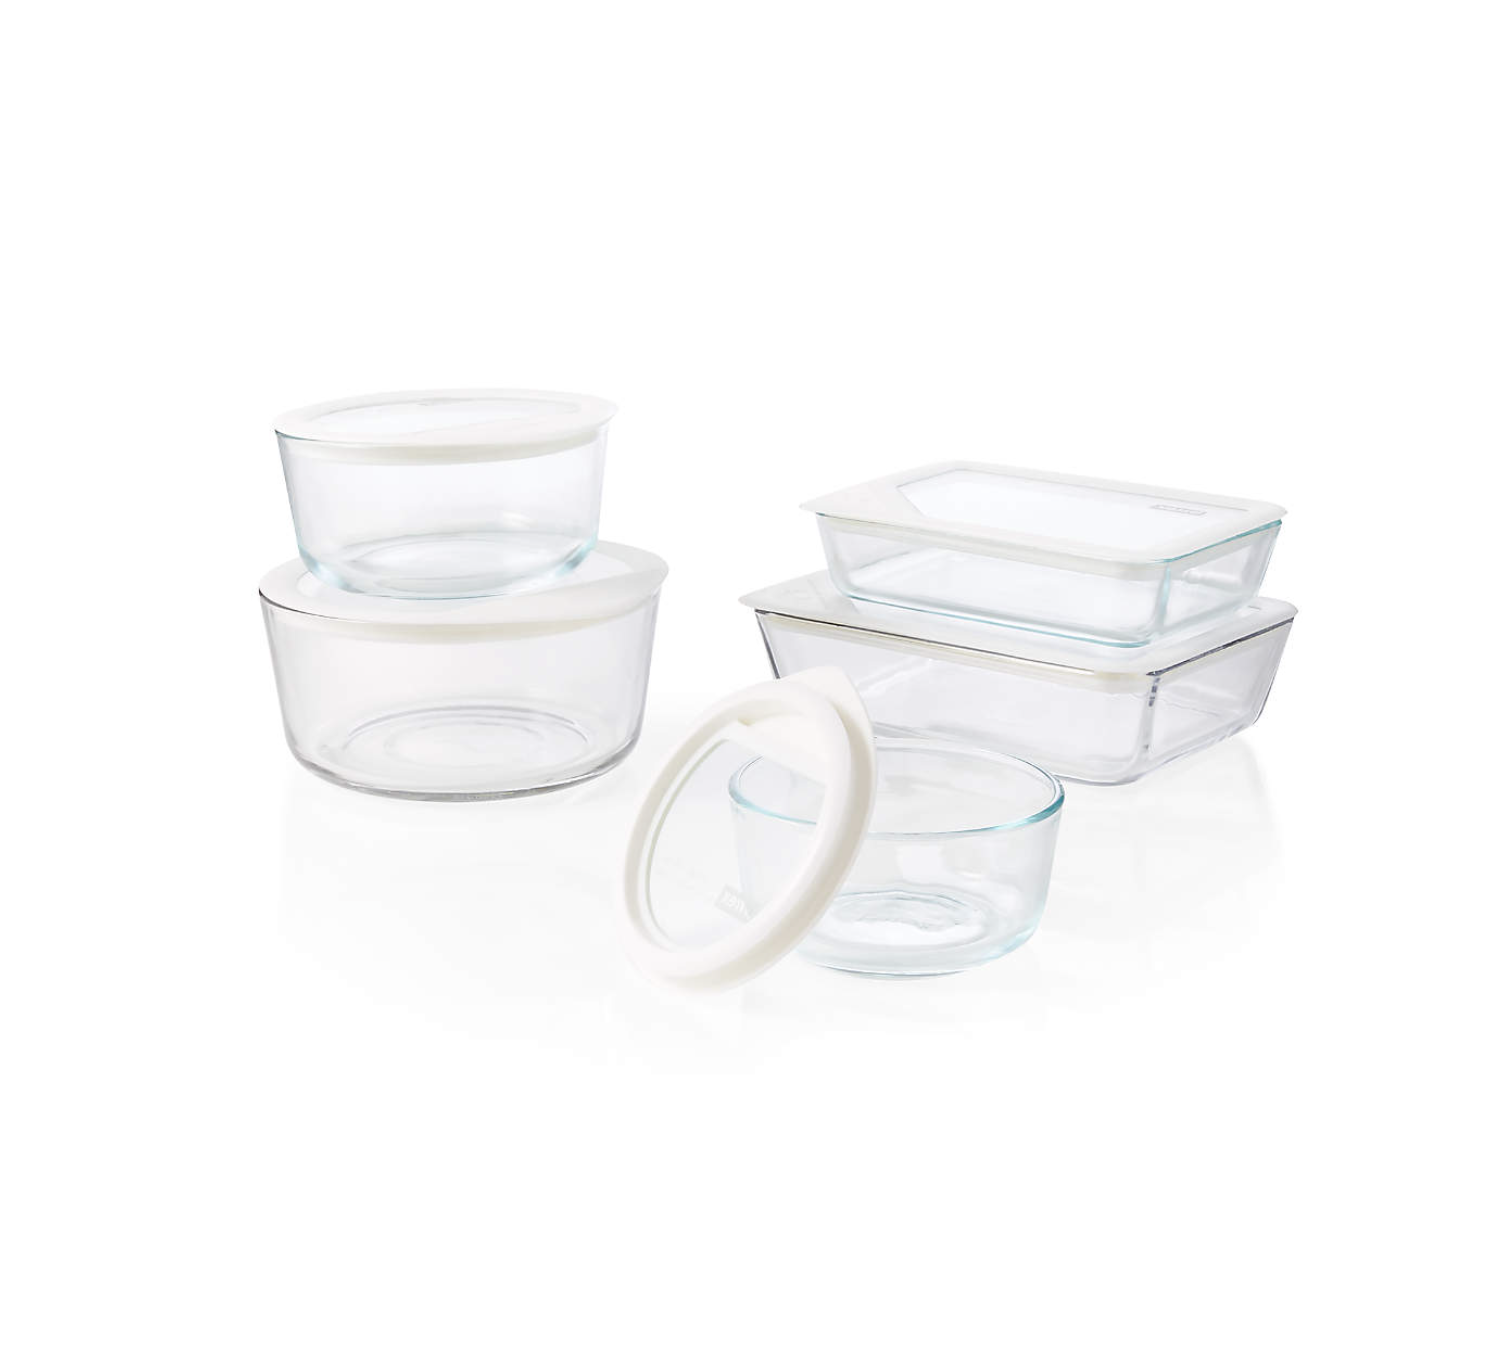 Oven Safe Glass Food Containers | Pyrex